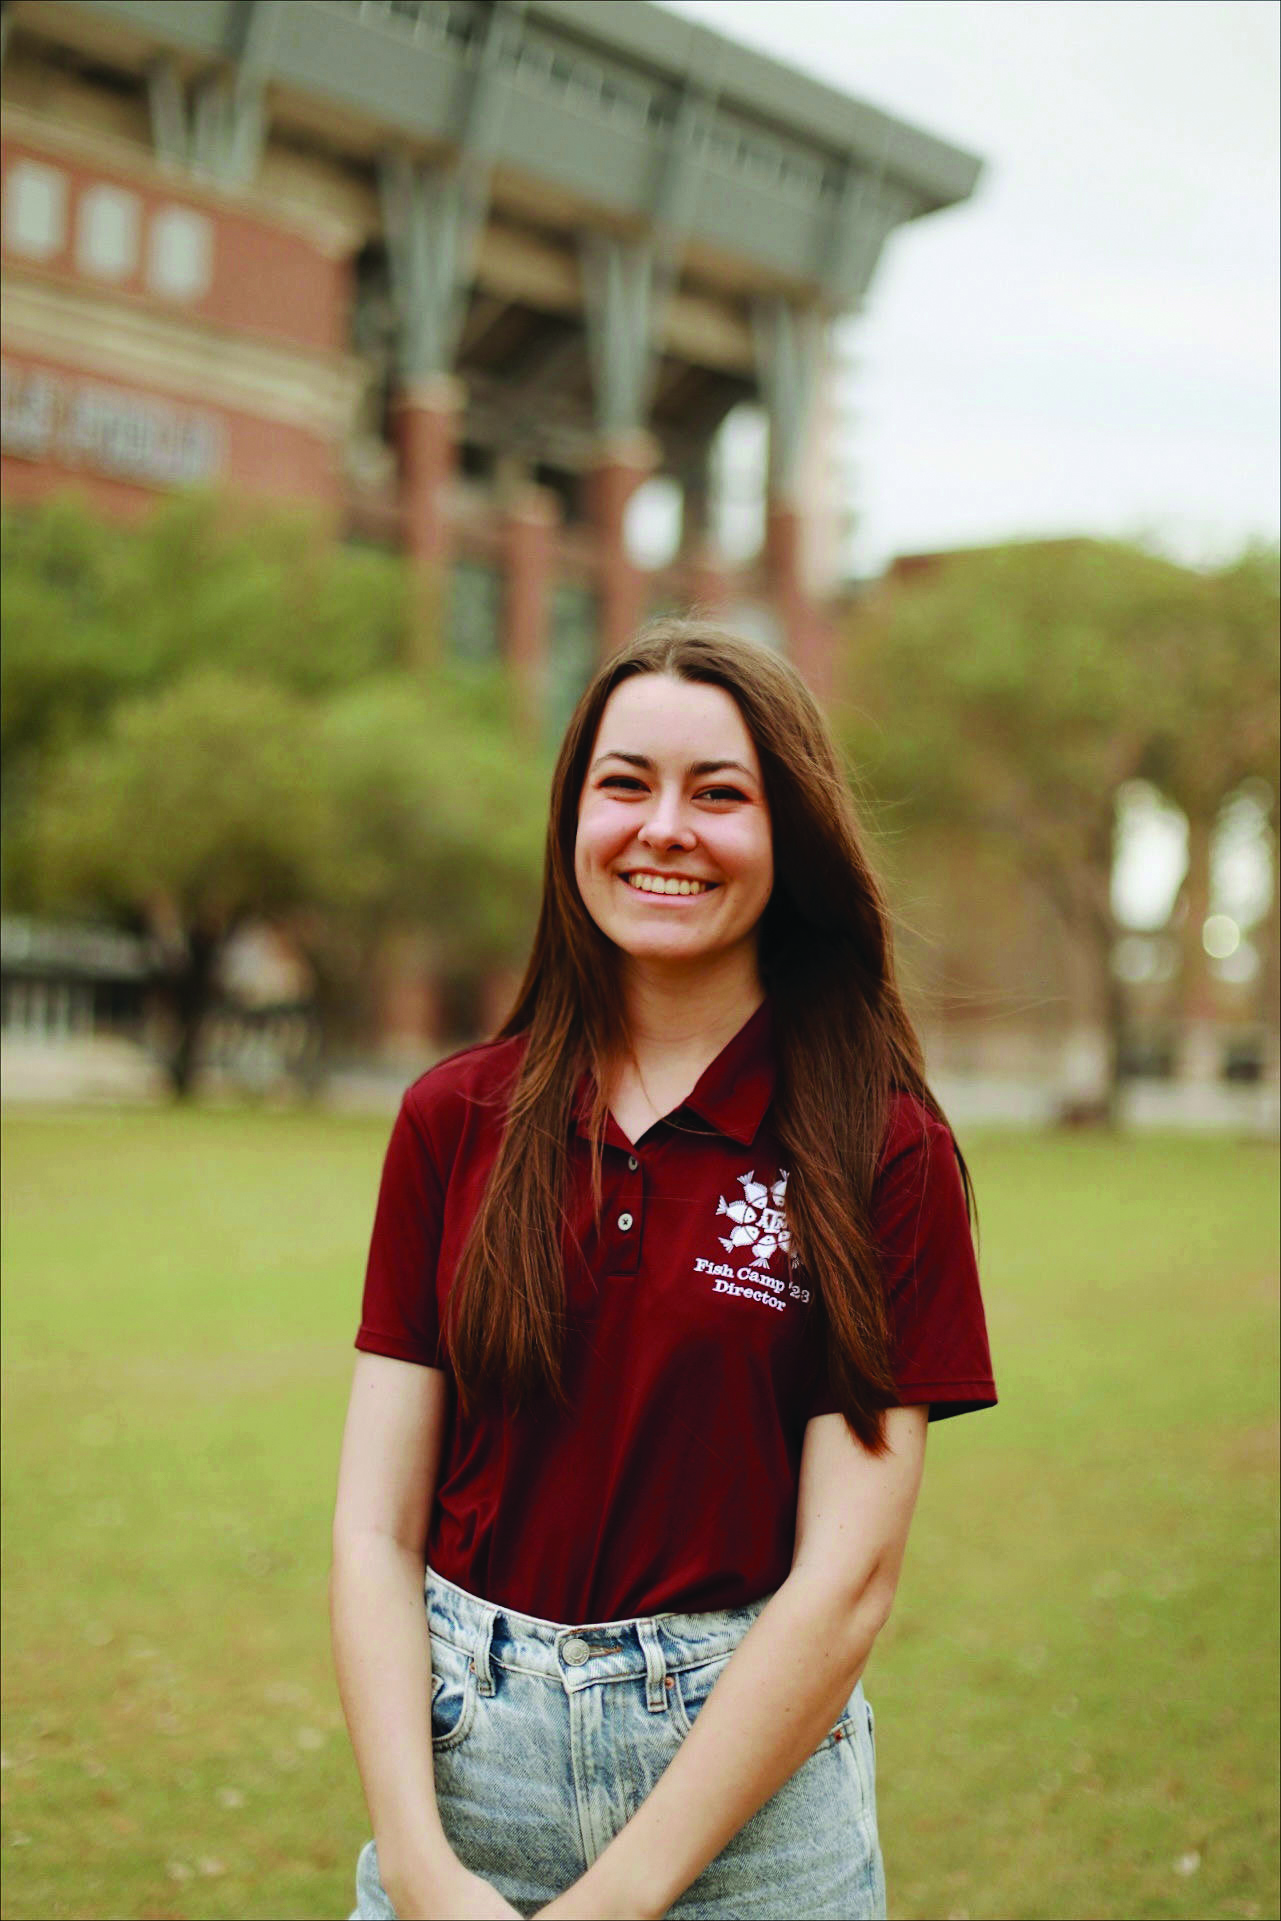 A headshot of a young woman smiling while wearing a maroon Fish Camp polo and standing in front of Kyle Field.